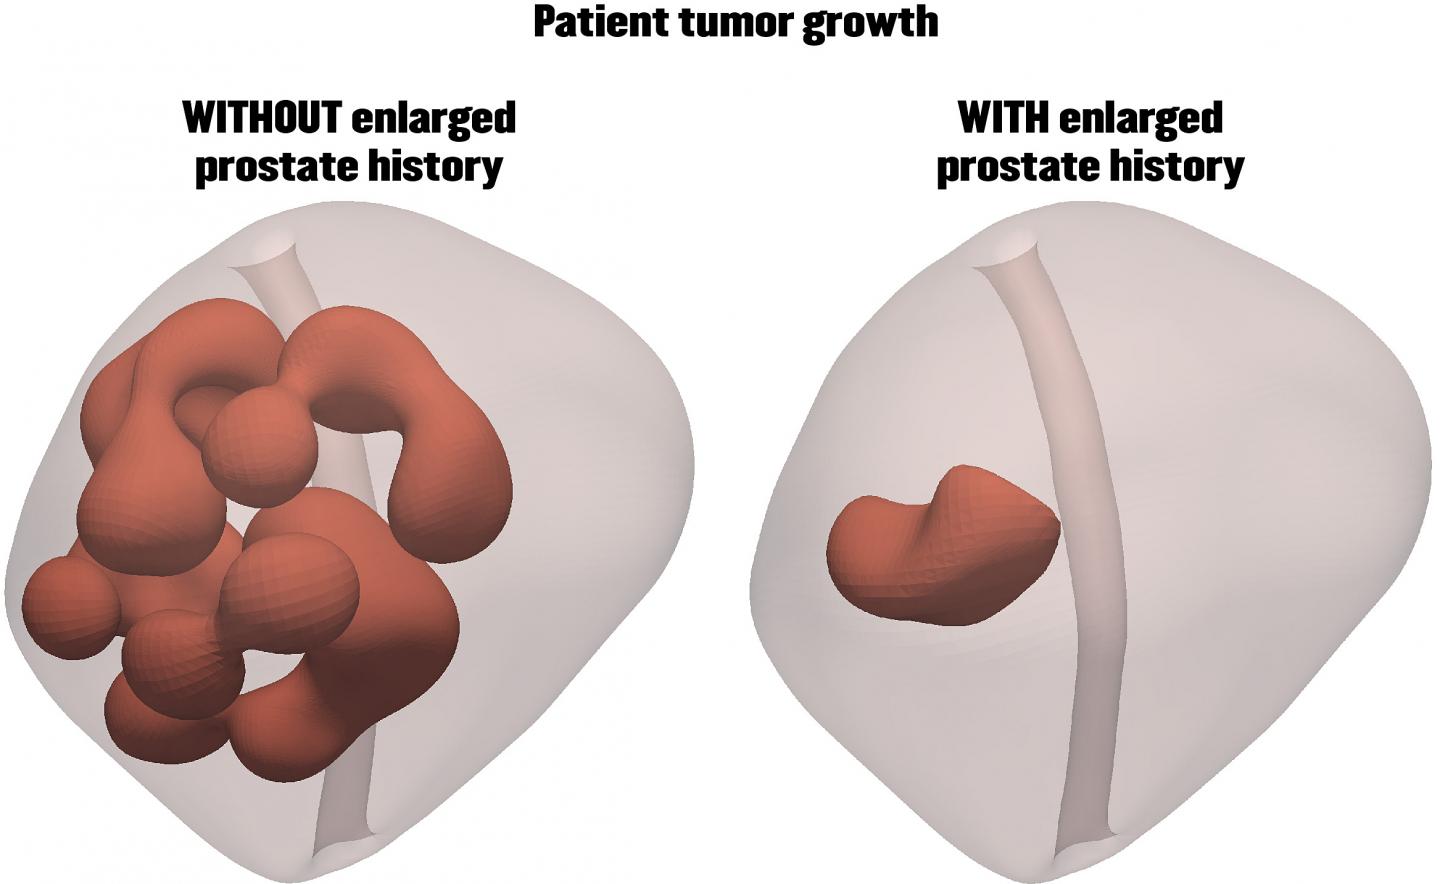 Simulations of the Prostate